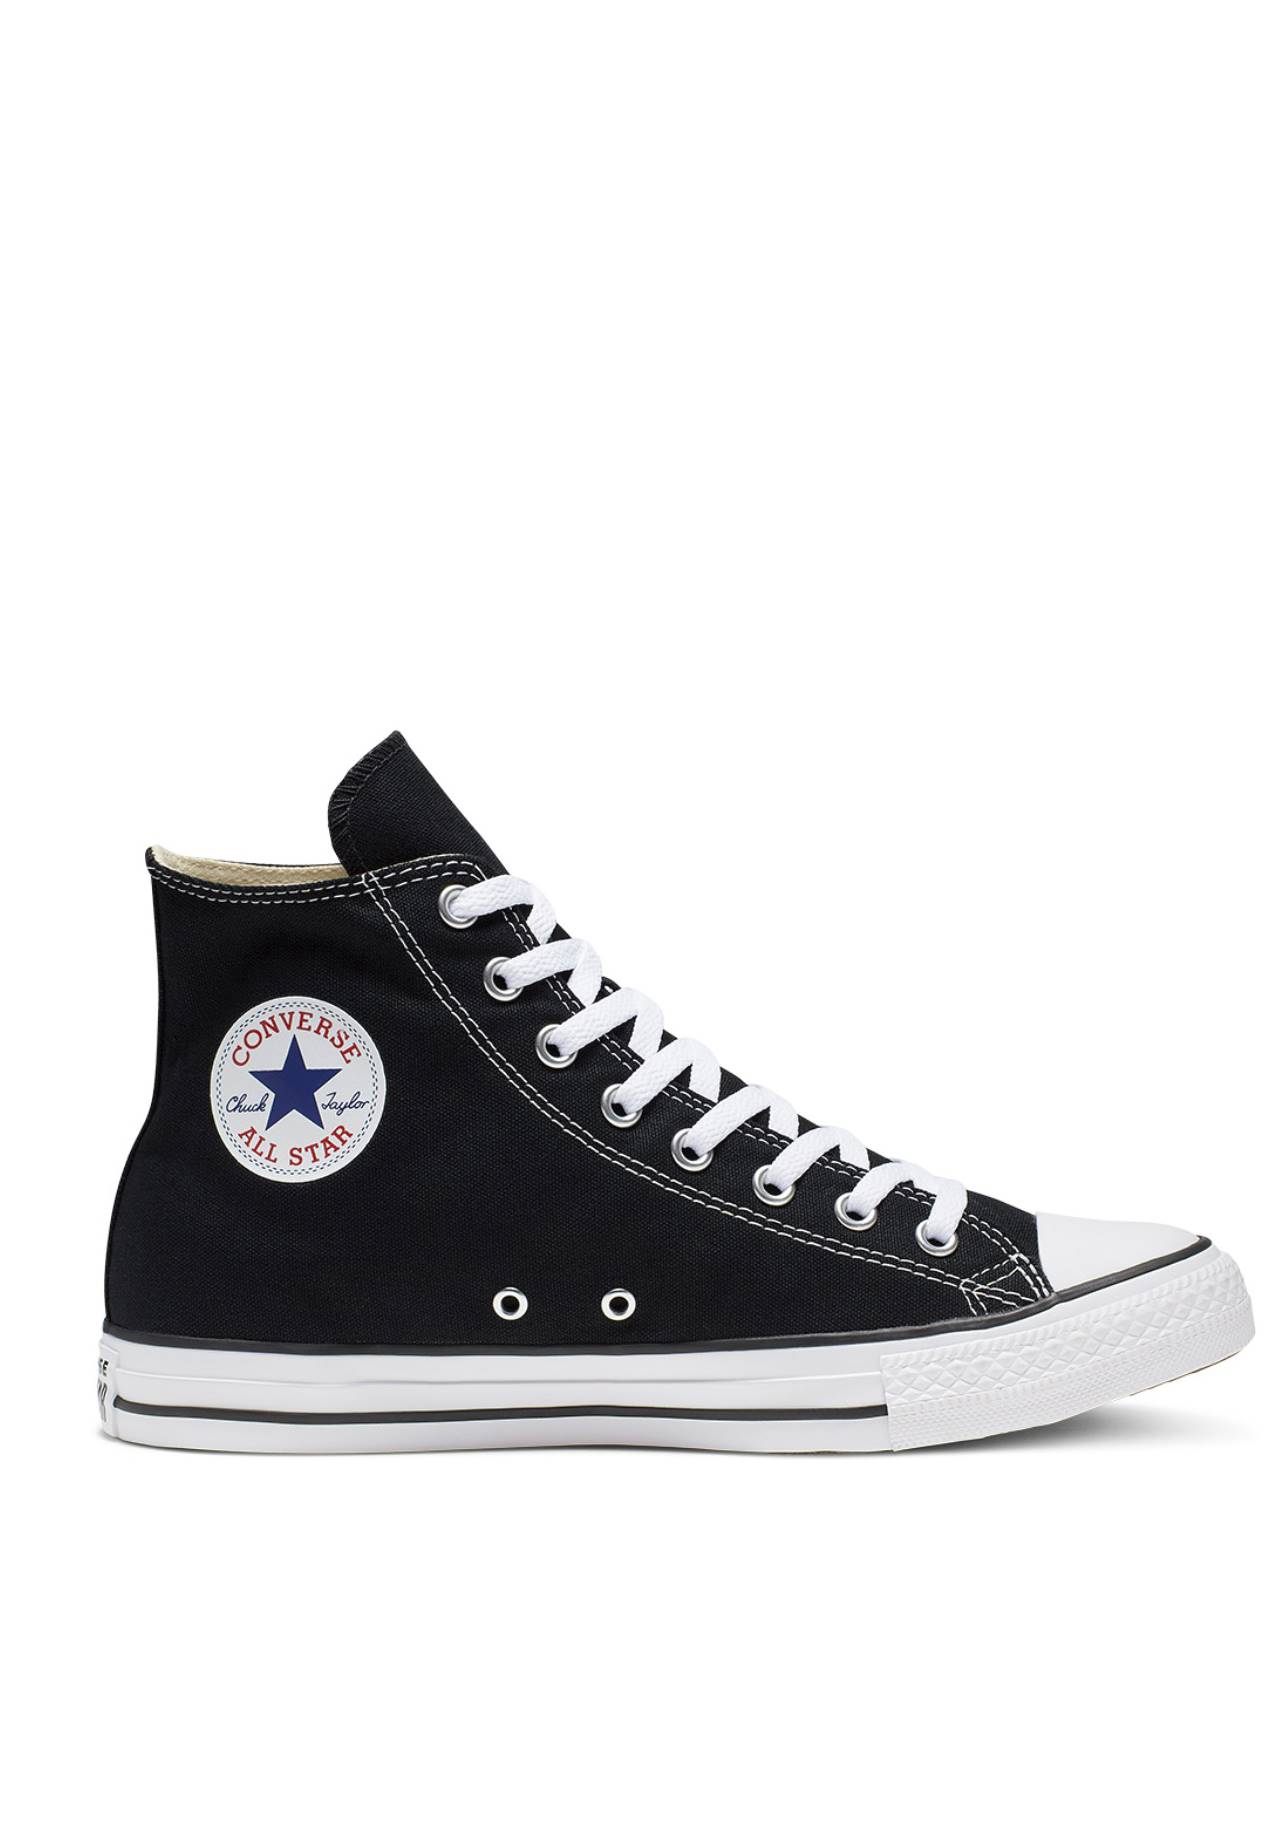 Chuck Taylor All Star Classic High Top